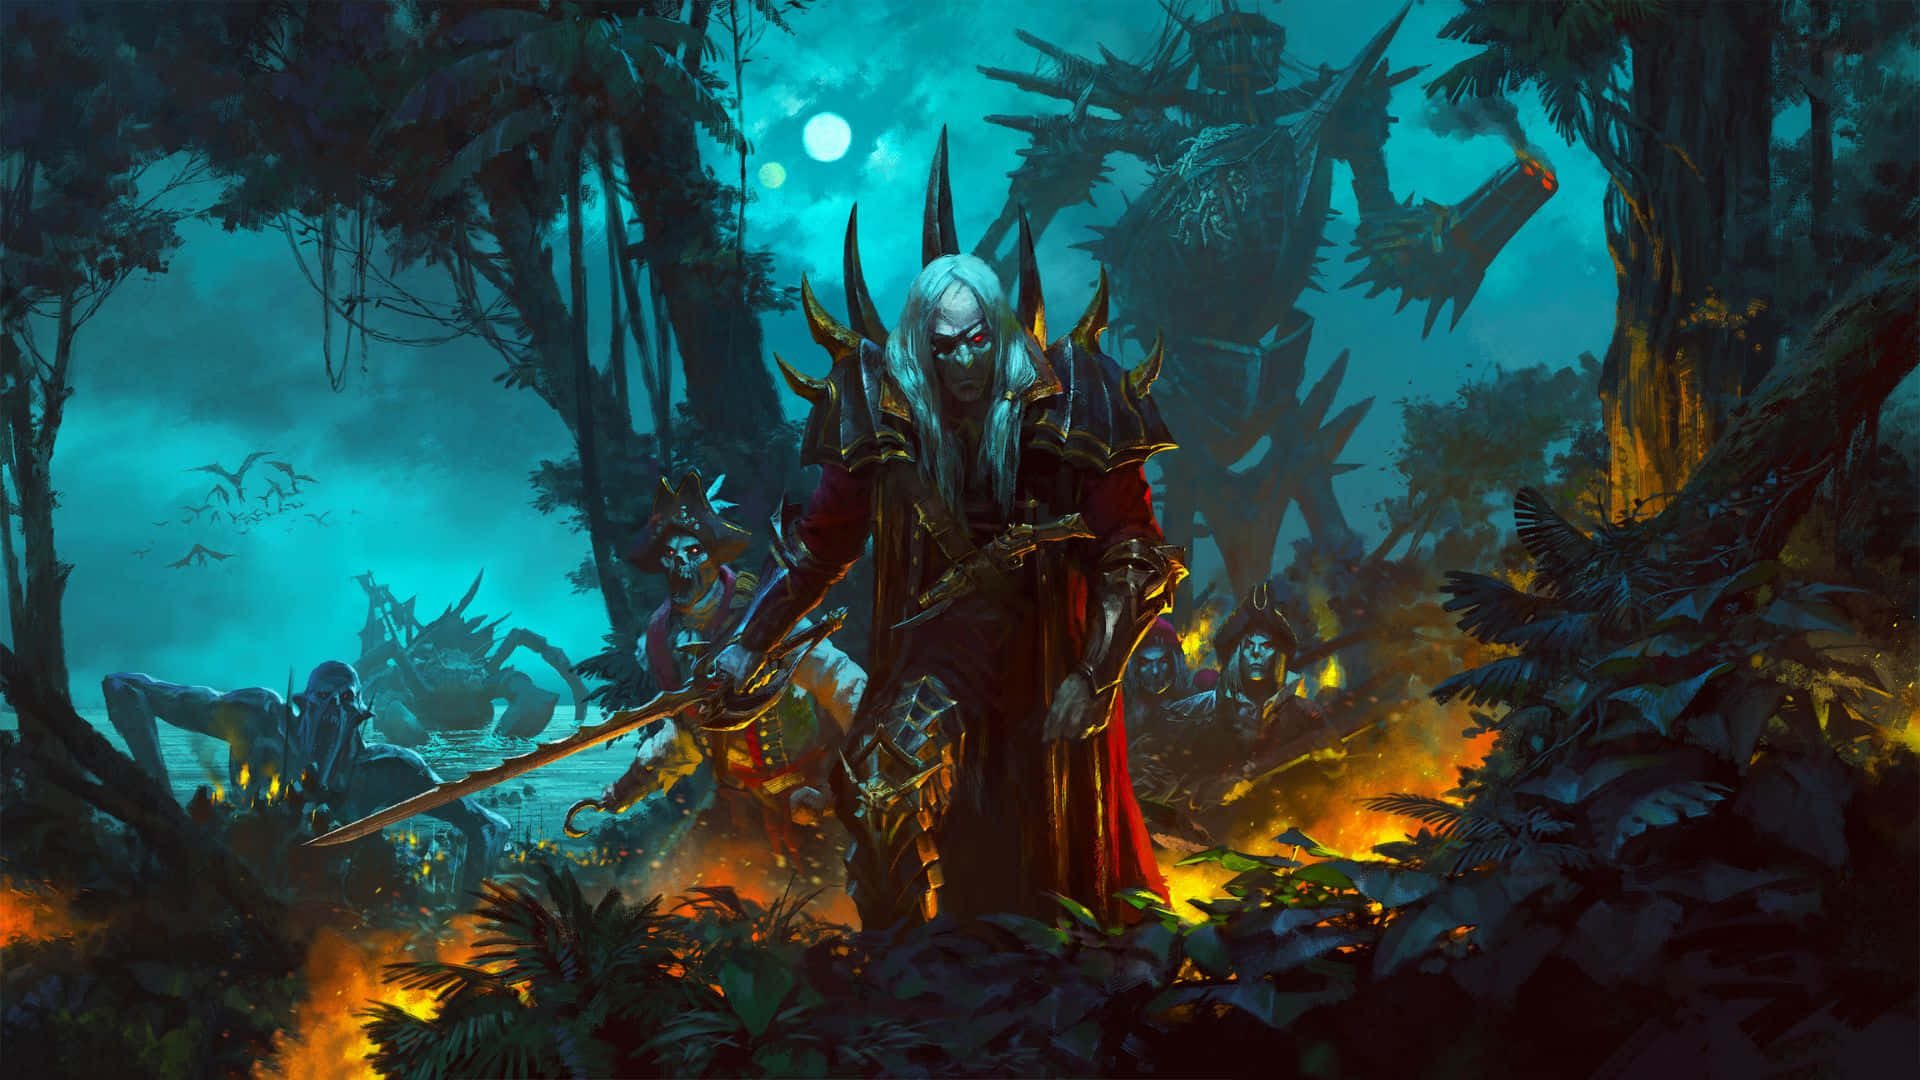 A Man In A Dark Forest With A Sword